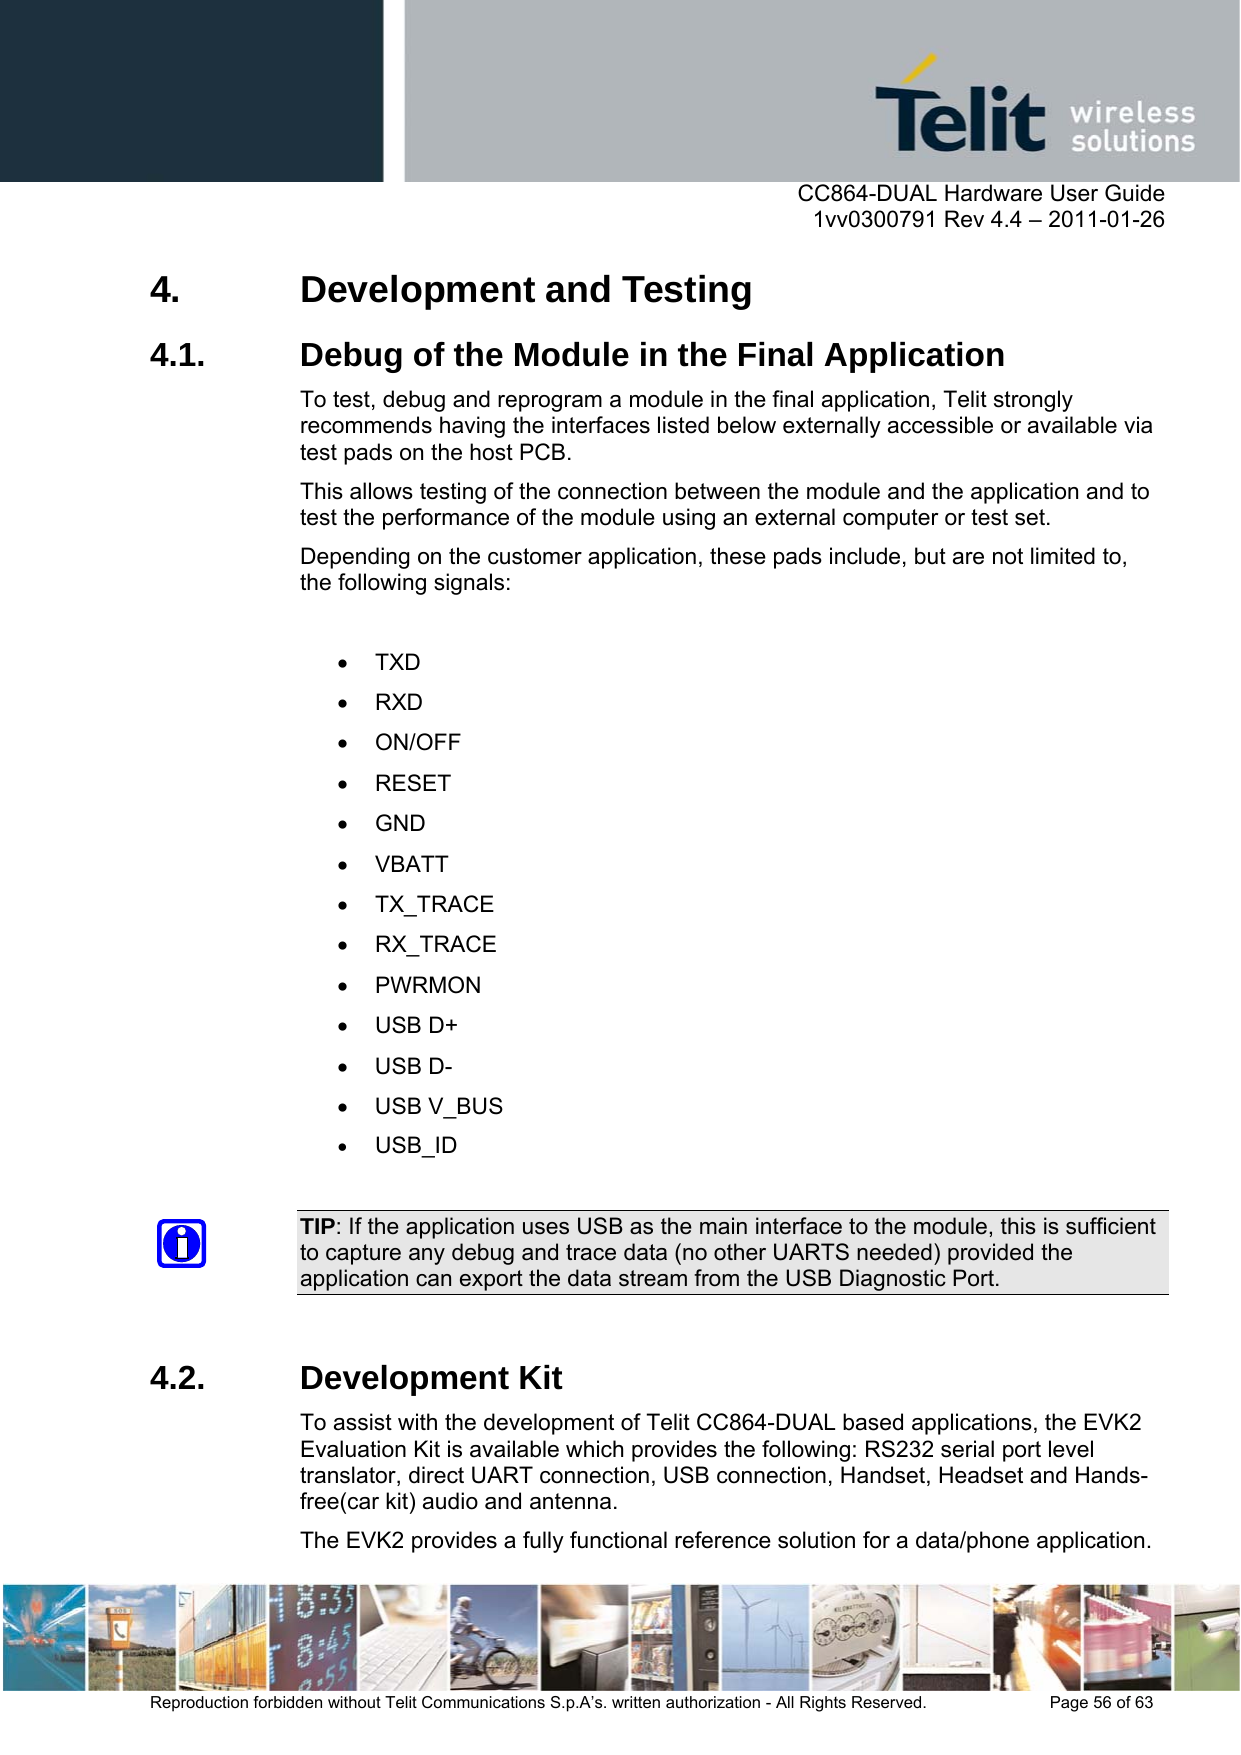      CC864-DUAL Hardware User Guide    1vv0300791 Rev 4.4 – 2011-01-26  Reproduction forbidden without Telit Communications S.p.A’s. written authorization - All Rights Reserved.    Page 56 of 63  4.  Development and Testing 4.1.  Debug of the Module in the Final Application To test, debug and reprogram a module in the final application, Telit strongly recommends having the interfaces listed below externally accessible or available via test pads on the host PCB. This allows testing of the connection between the module and the application and to test the performance of the module using an external computer or test set. Depending on the customer application, these pads include, but are not limited to, the following signals:   TXD  RXD  ON/OFF  RESET  GND  VBATT  TX_TRACE  RX_TRACE  PWRMON   USB D+  USB D-   USB V_BUS   USB_ID   TIP: If the application uses USB as the main interface to the module, this is sufficient to capture any debug and trace data (no other UARTS needed) provided the application can export the data stream from the USB Diagnostic Port.  4.2. Development Kit To assist with the development of Telit CC864-DUAL based applications, the EVK2 Evaluation Kit is available which provides the following: RS232 serial port level translator, direct UART connection, USB connection, Handset, Headset and Hands-free(car kit) audio and antenna.  The EVK2 provides a fully functional reference solution for a data/phone application. 